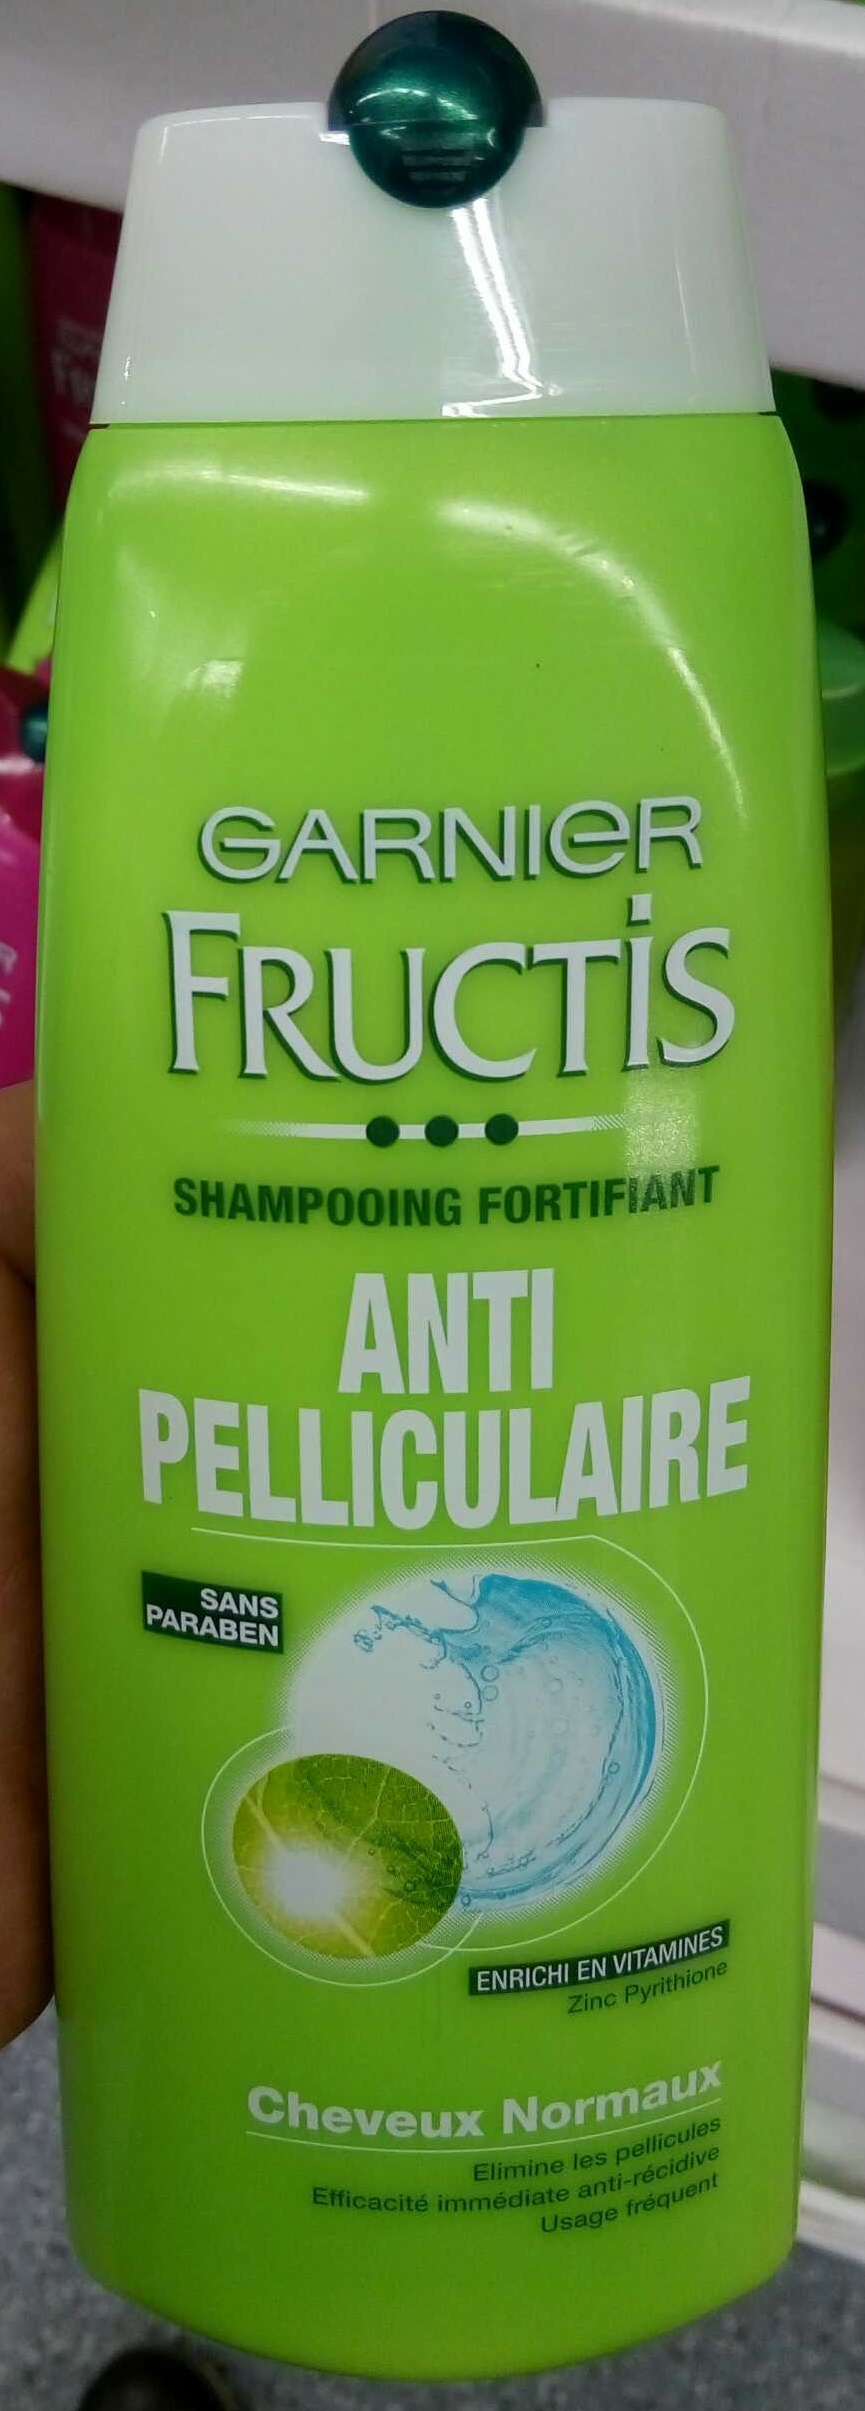 Fructis Shampooing fortifiant anti pelliculaire - Tuote - fr